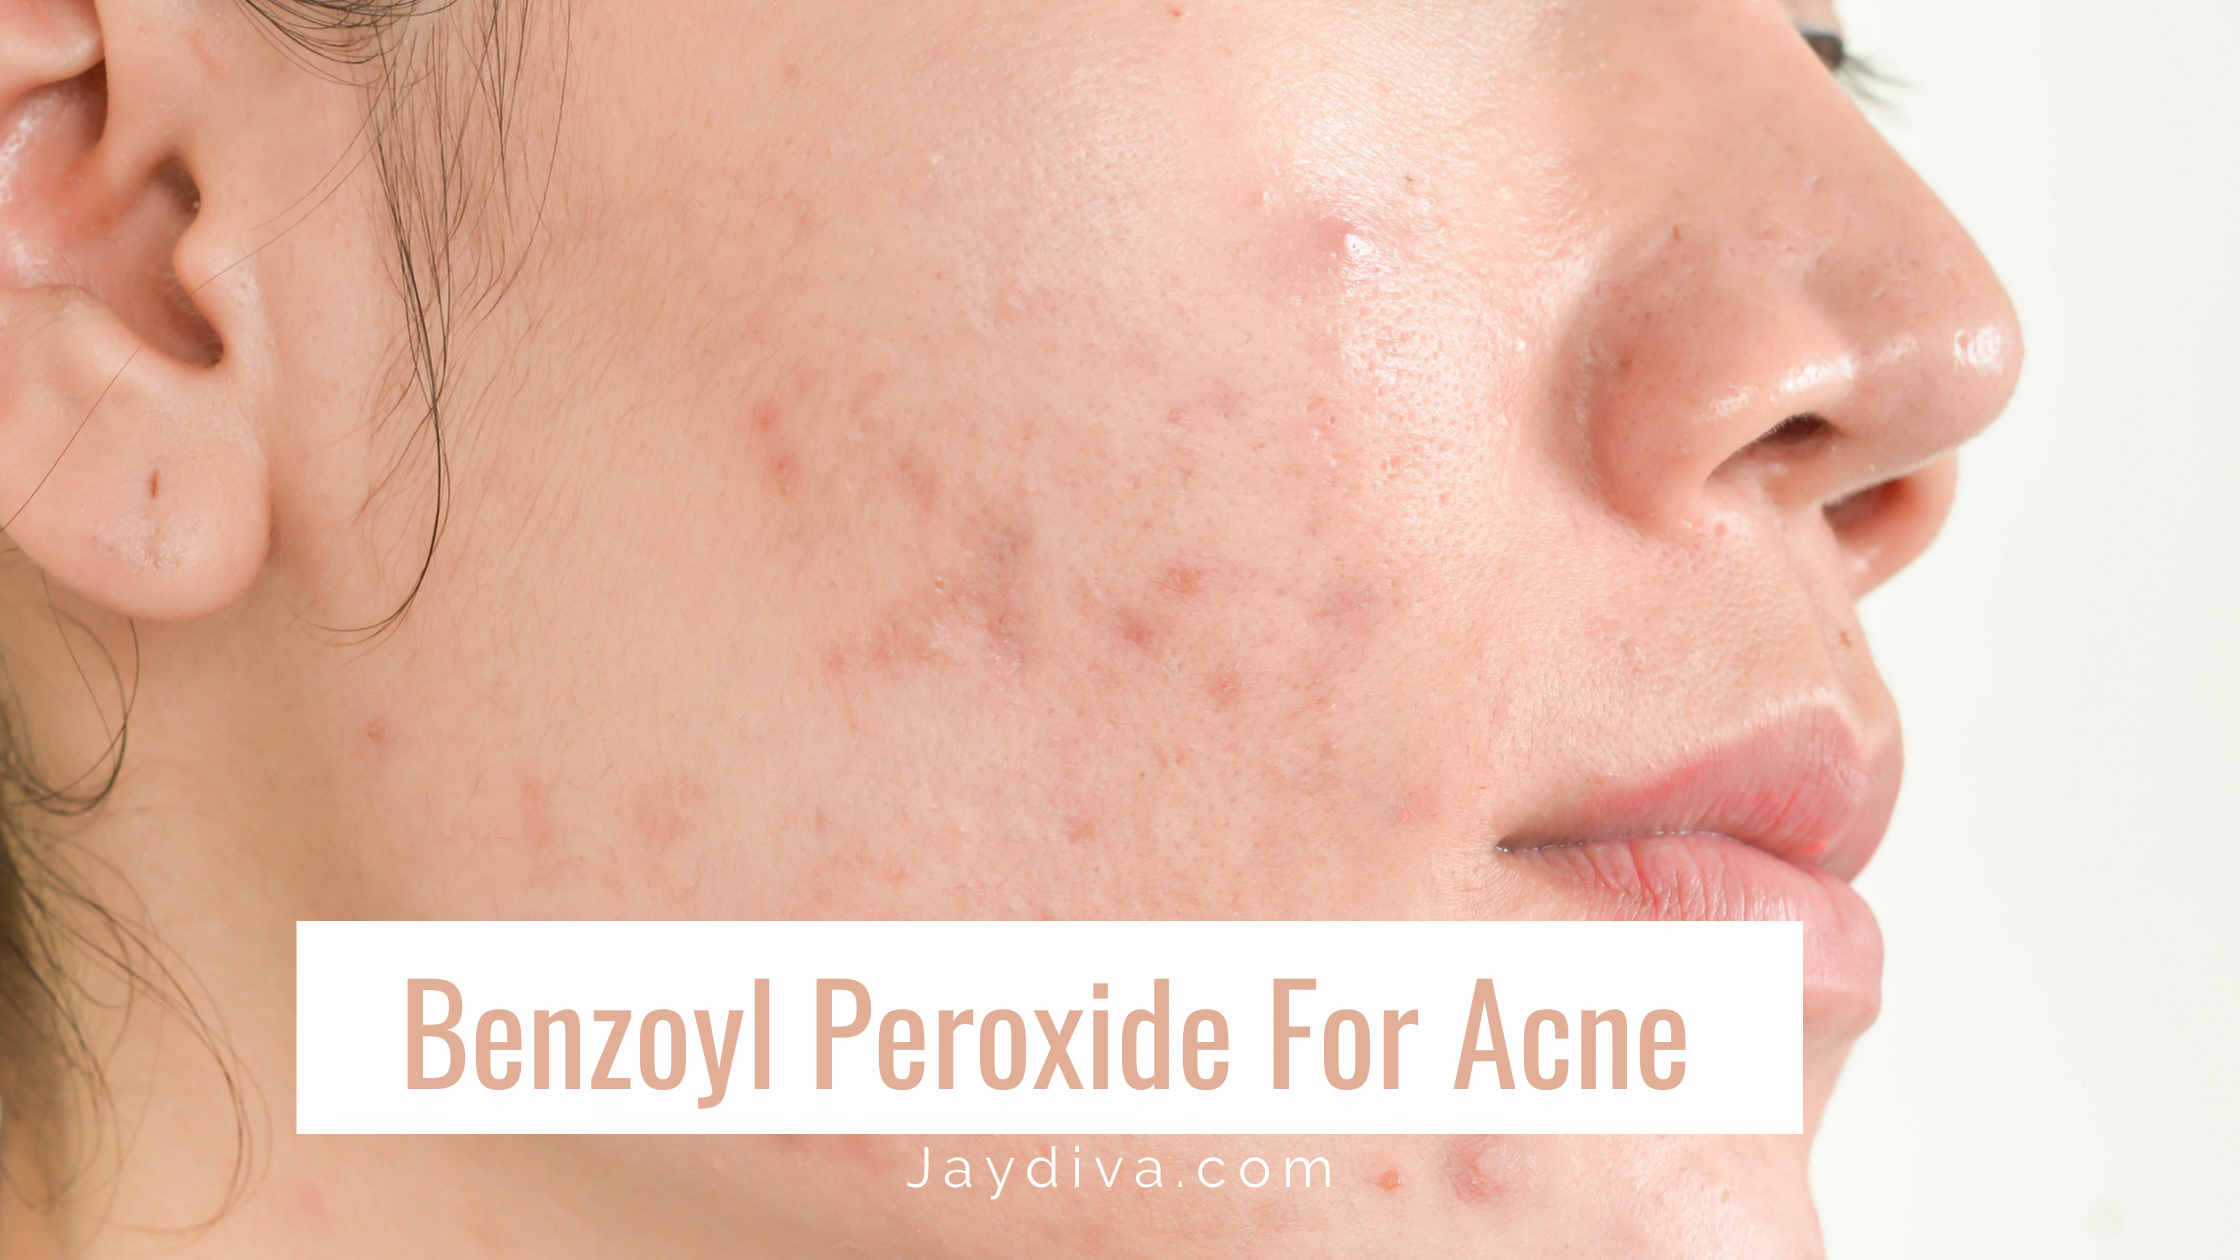 How to Use Benzoyl Peroxide for Acne to See Results